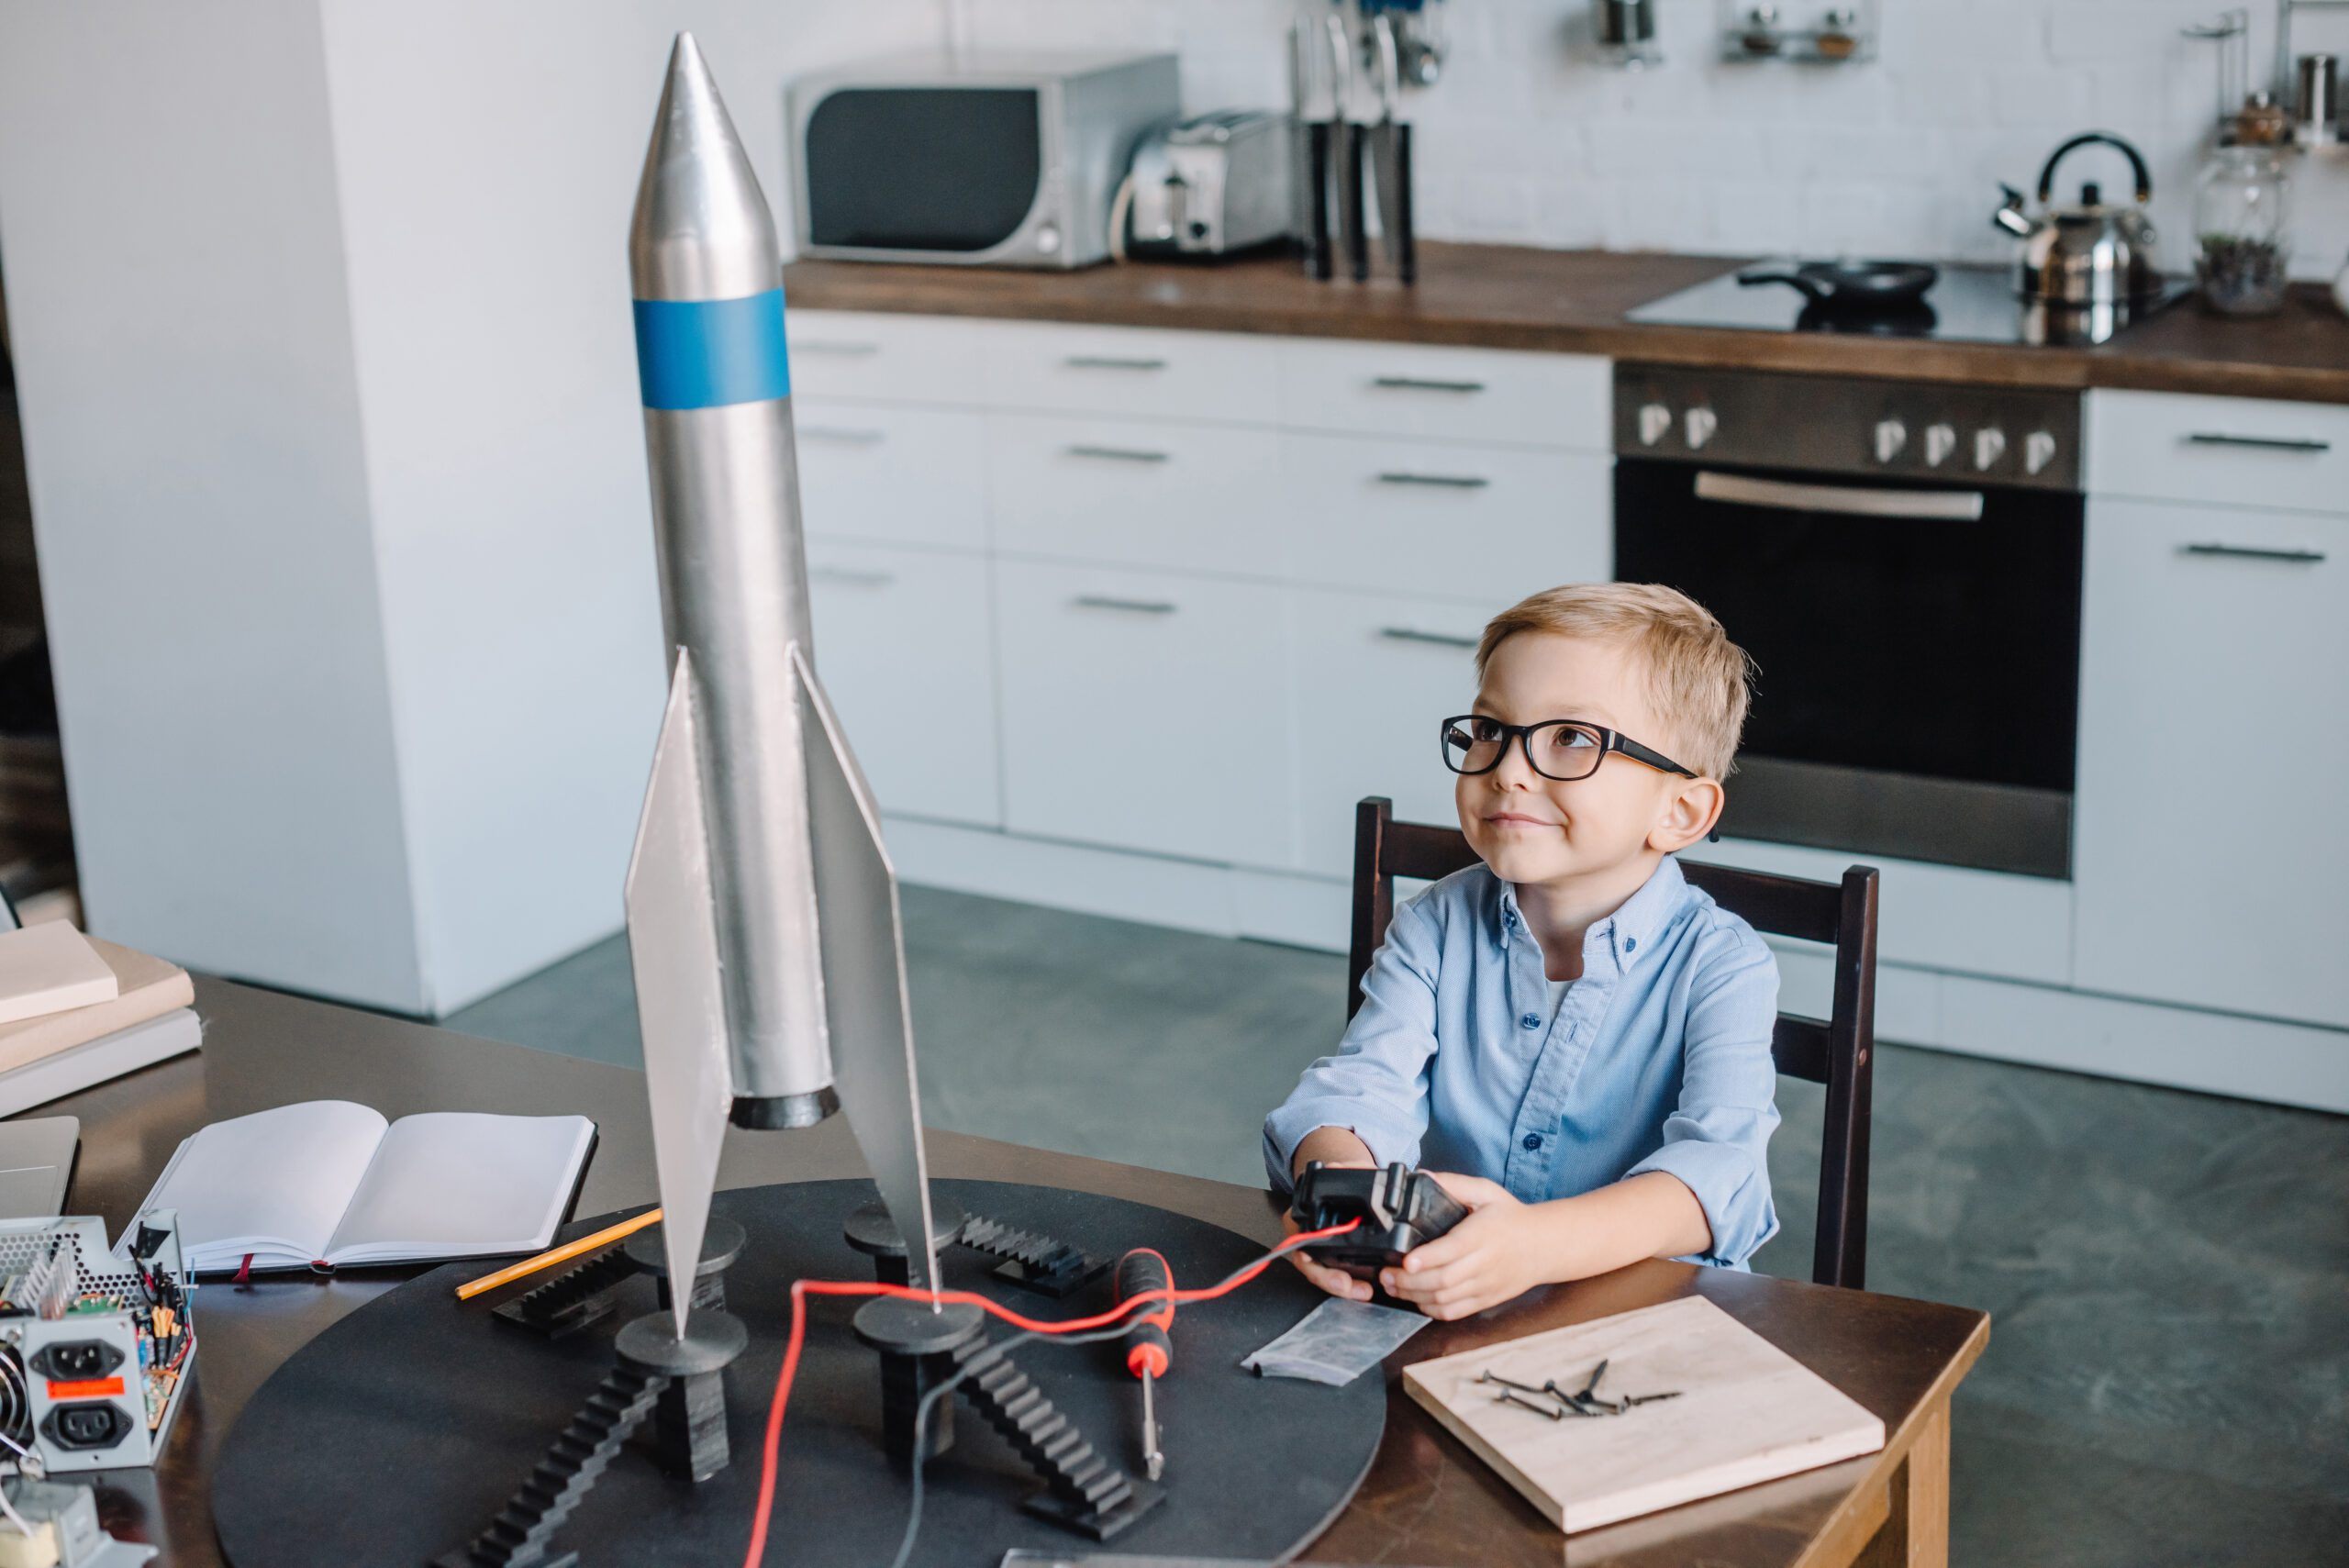 adorable boy sitting at table and testing rocket model in kitchen on weekend